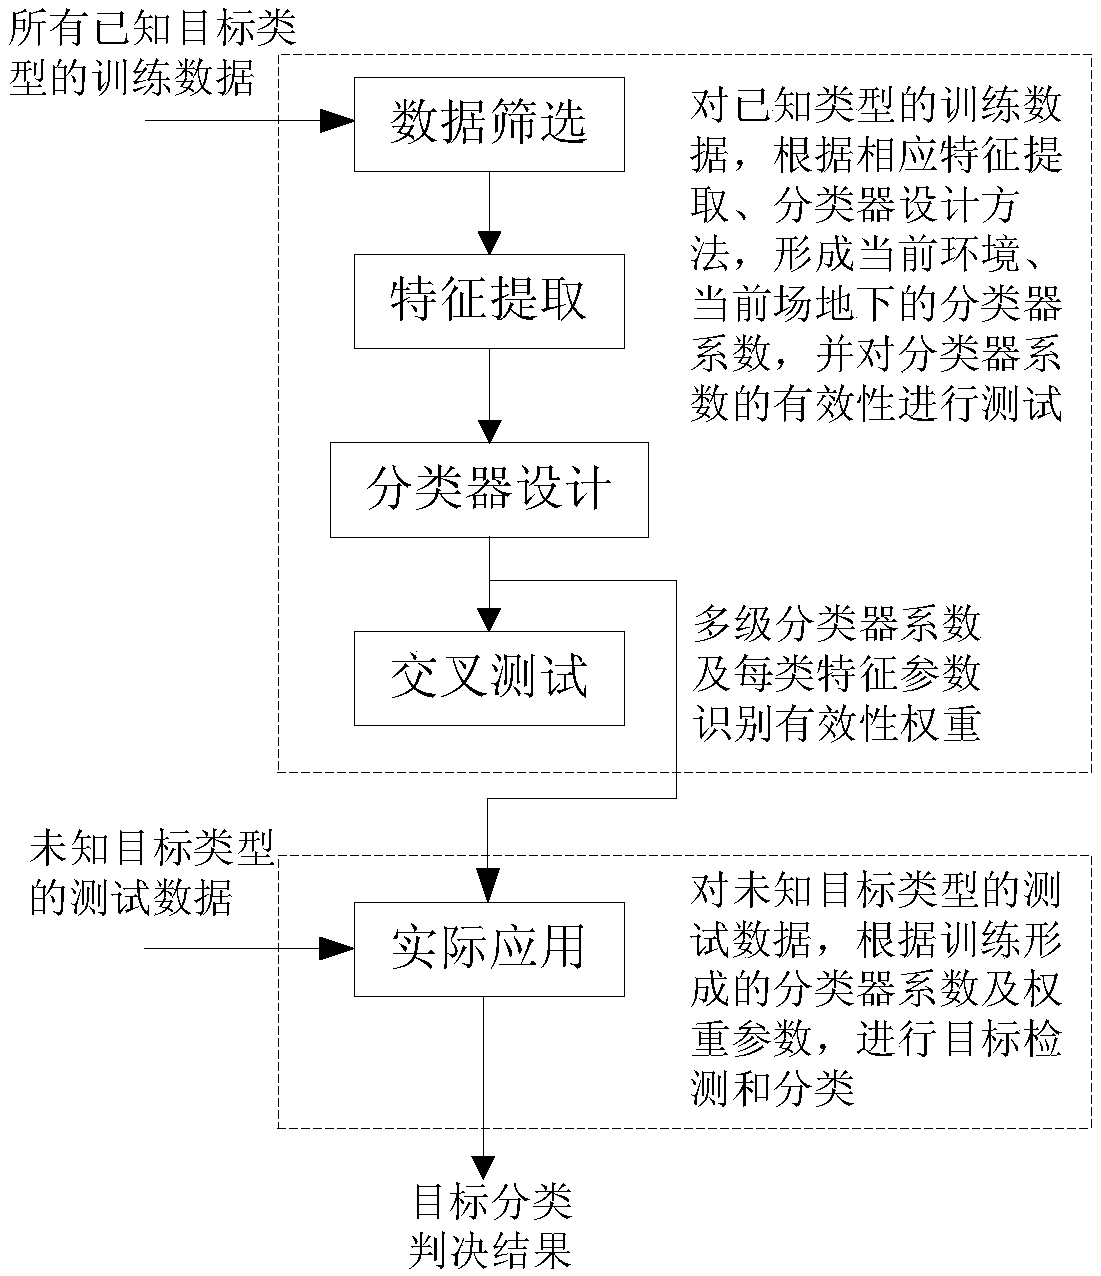 Target classification identification method used for distributed optical fiber sensing system